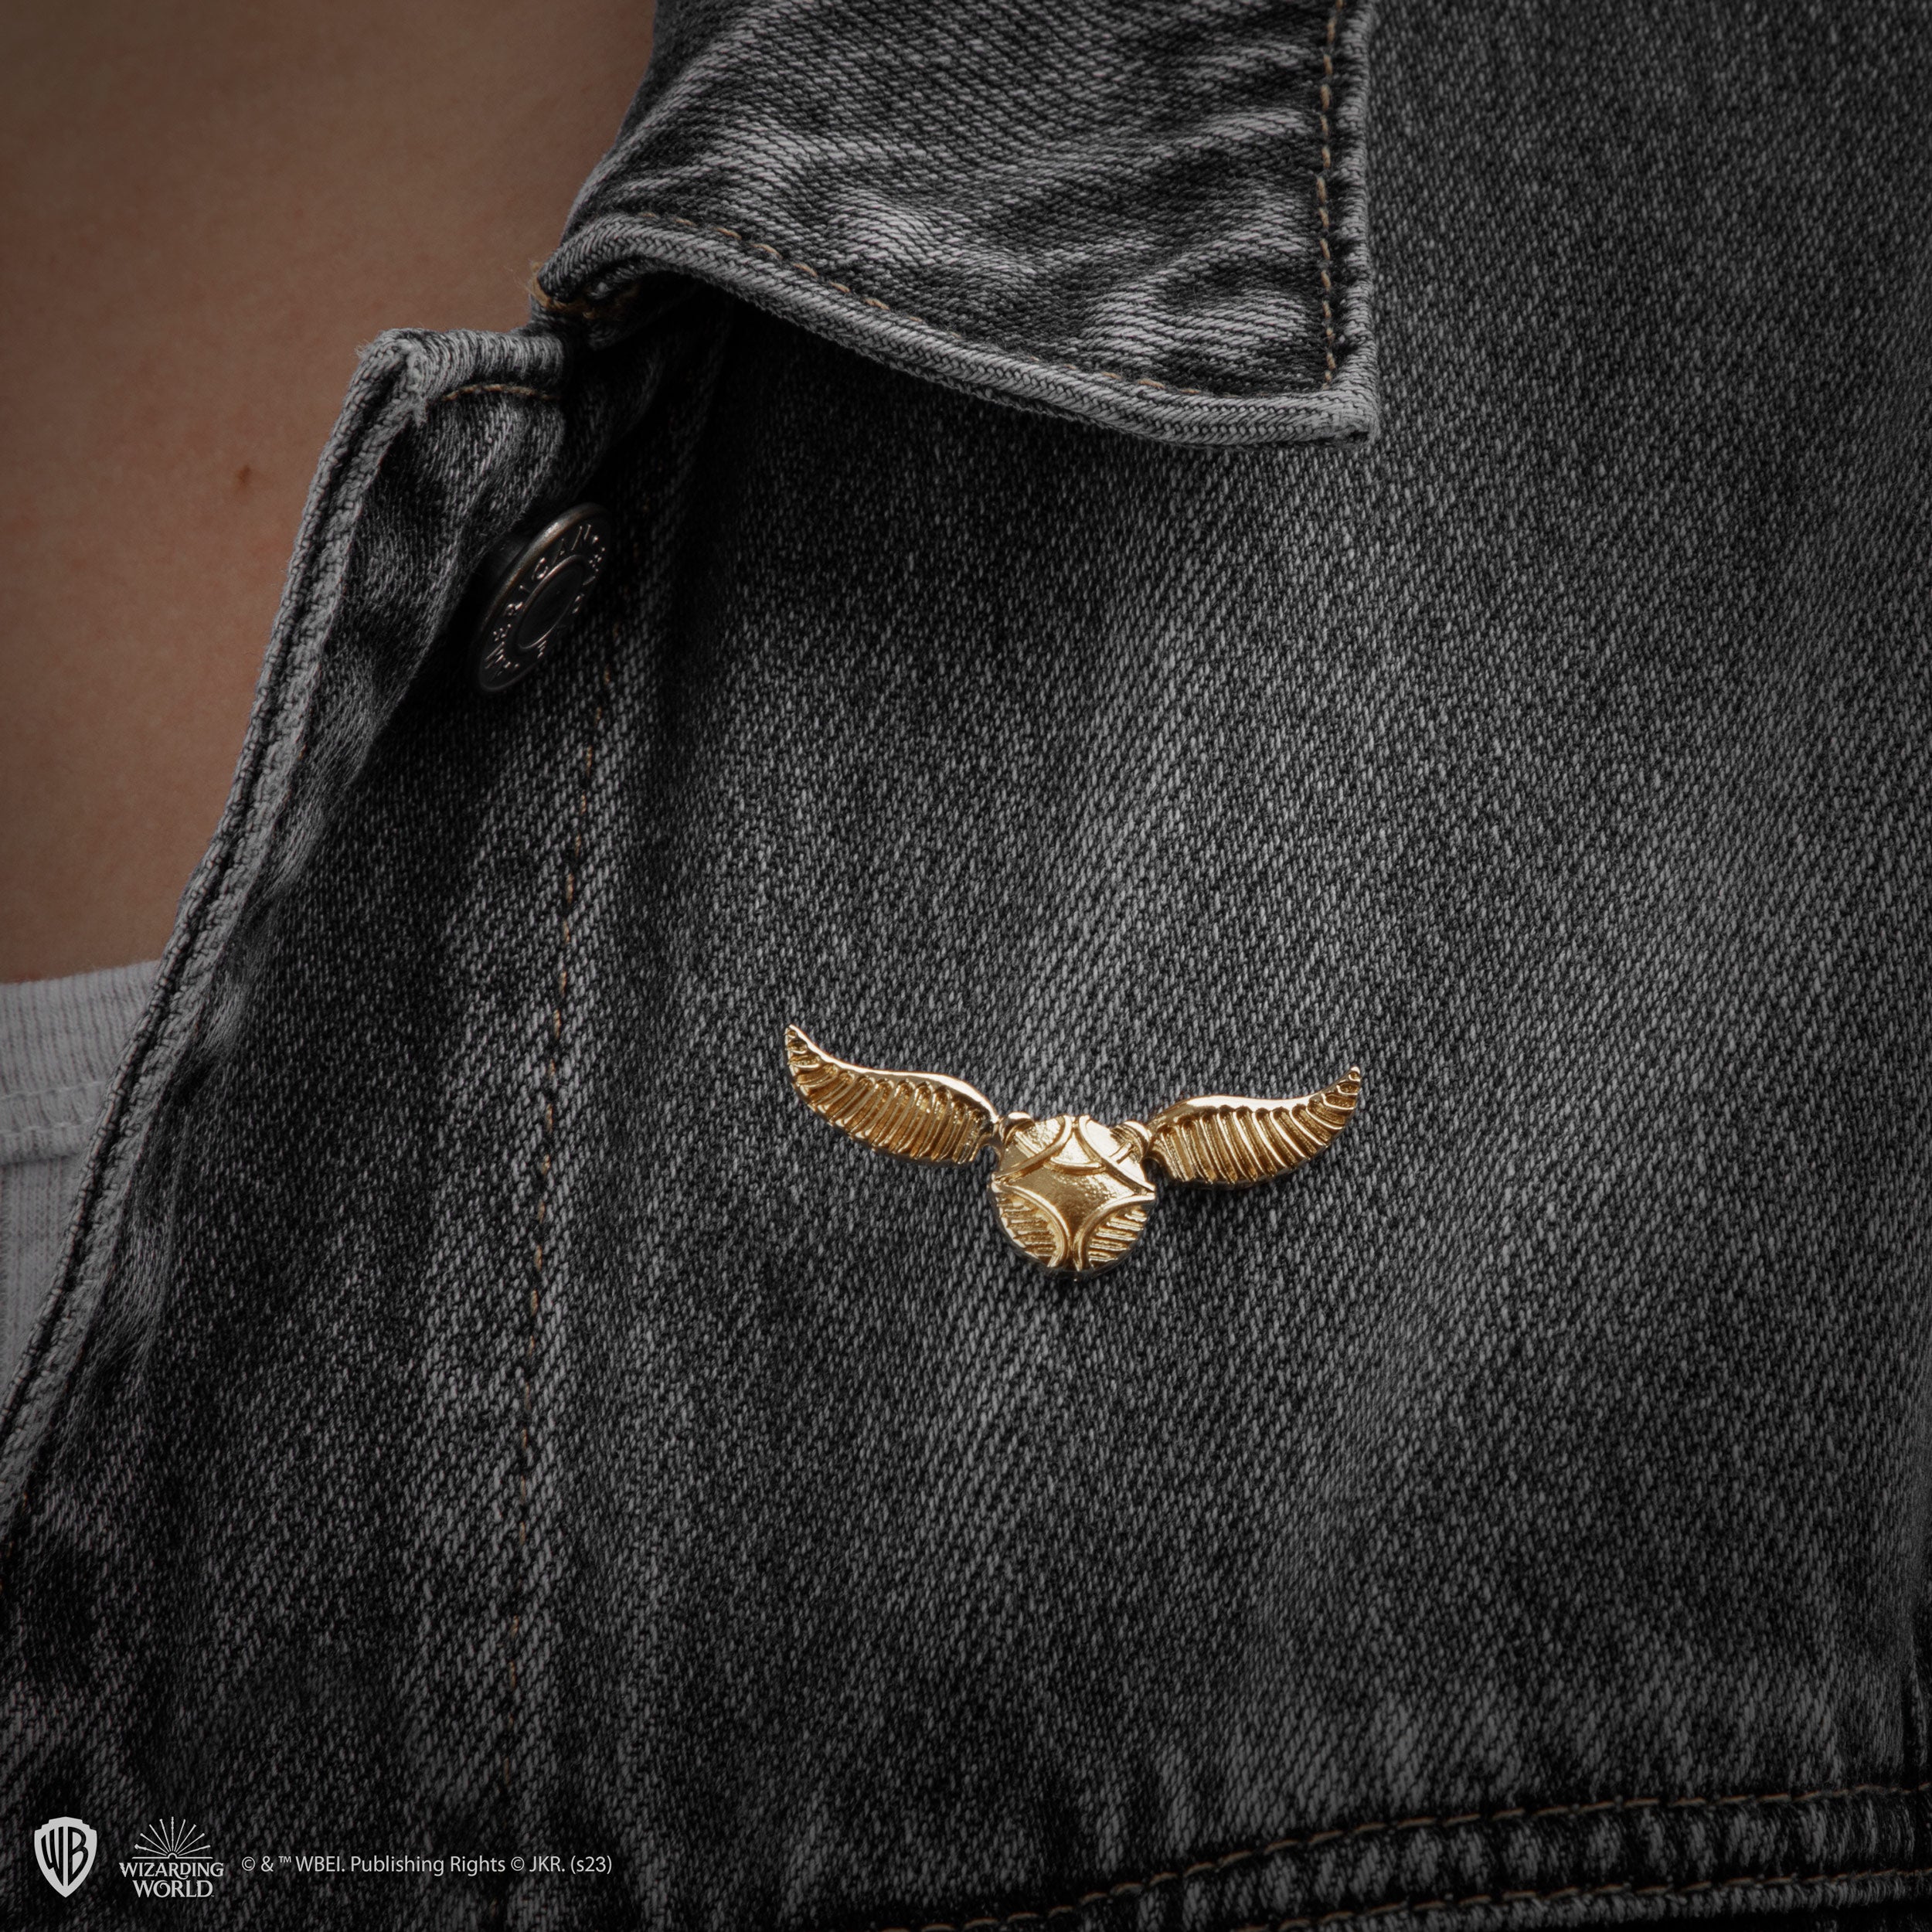 Official Golden Snitch Pin Badge